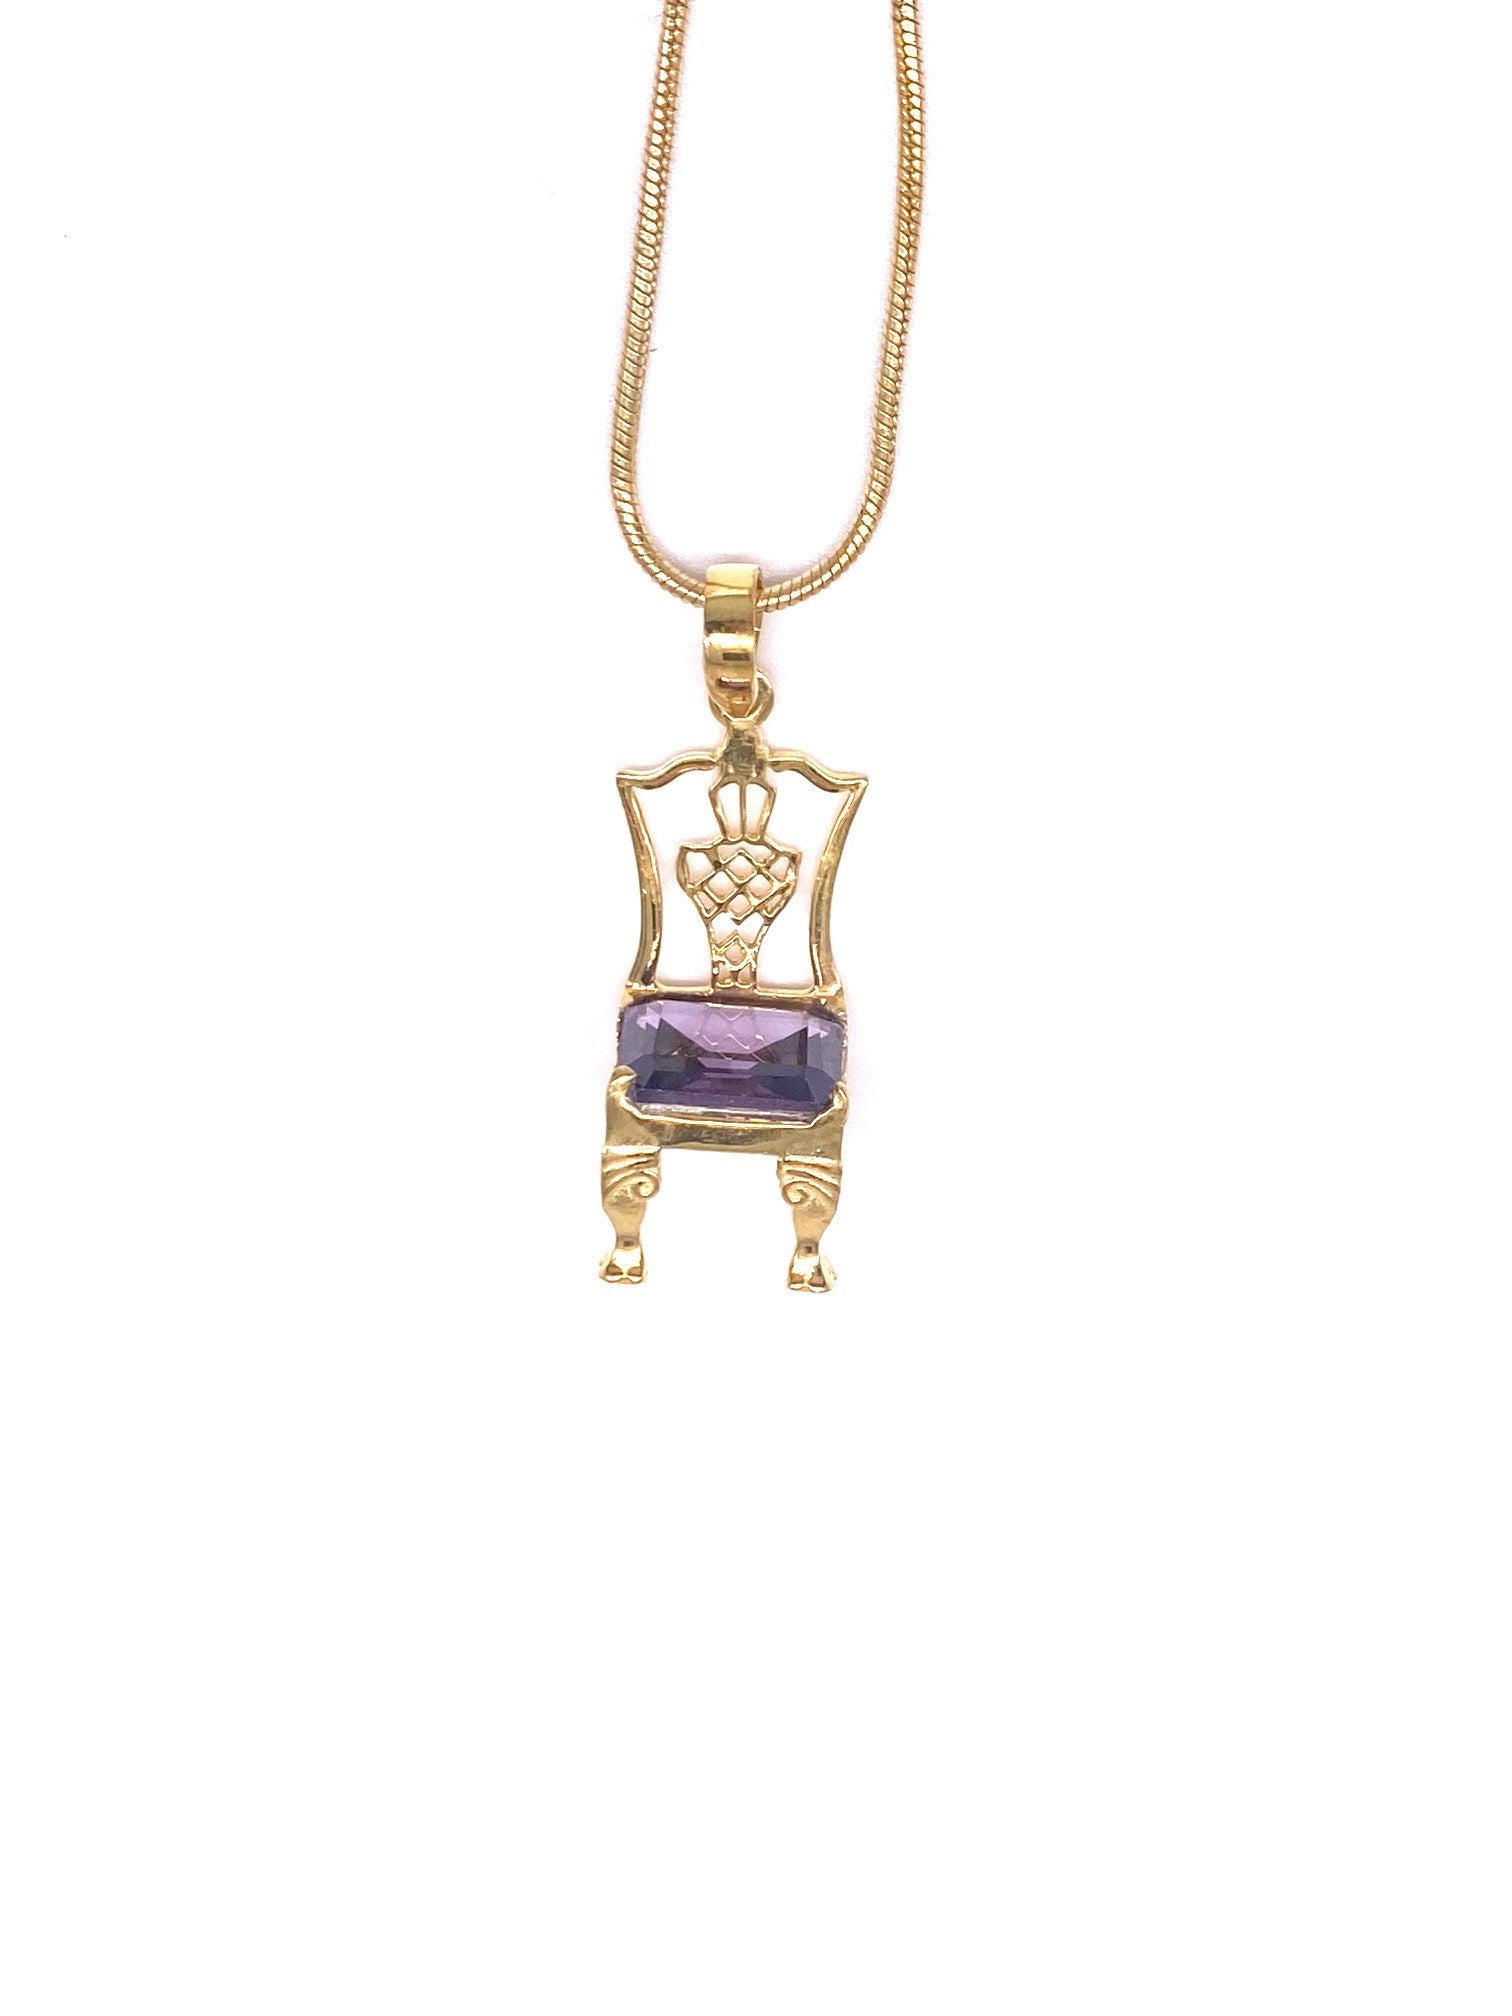 Chair on Gold Necklace - Choose Your Birthstone